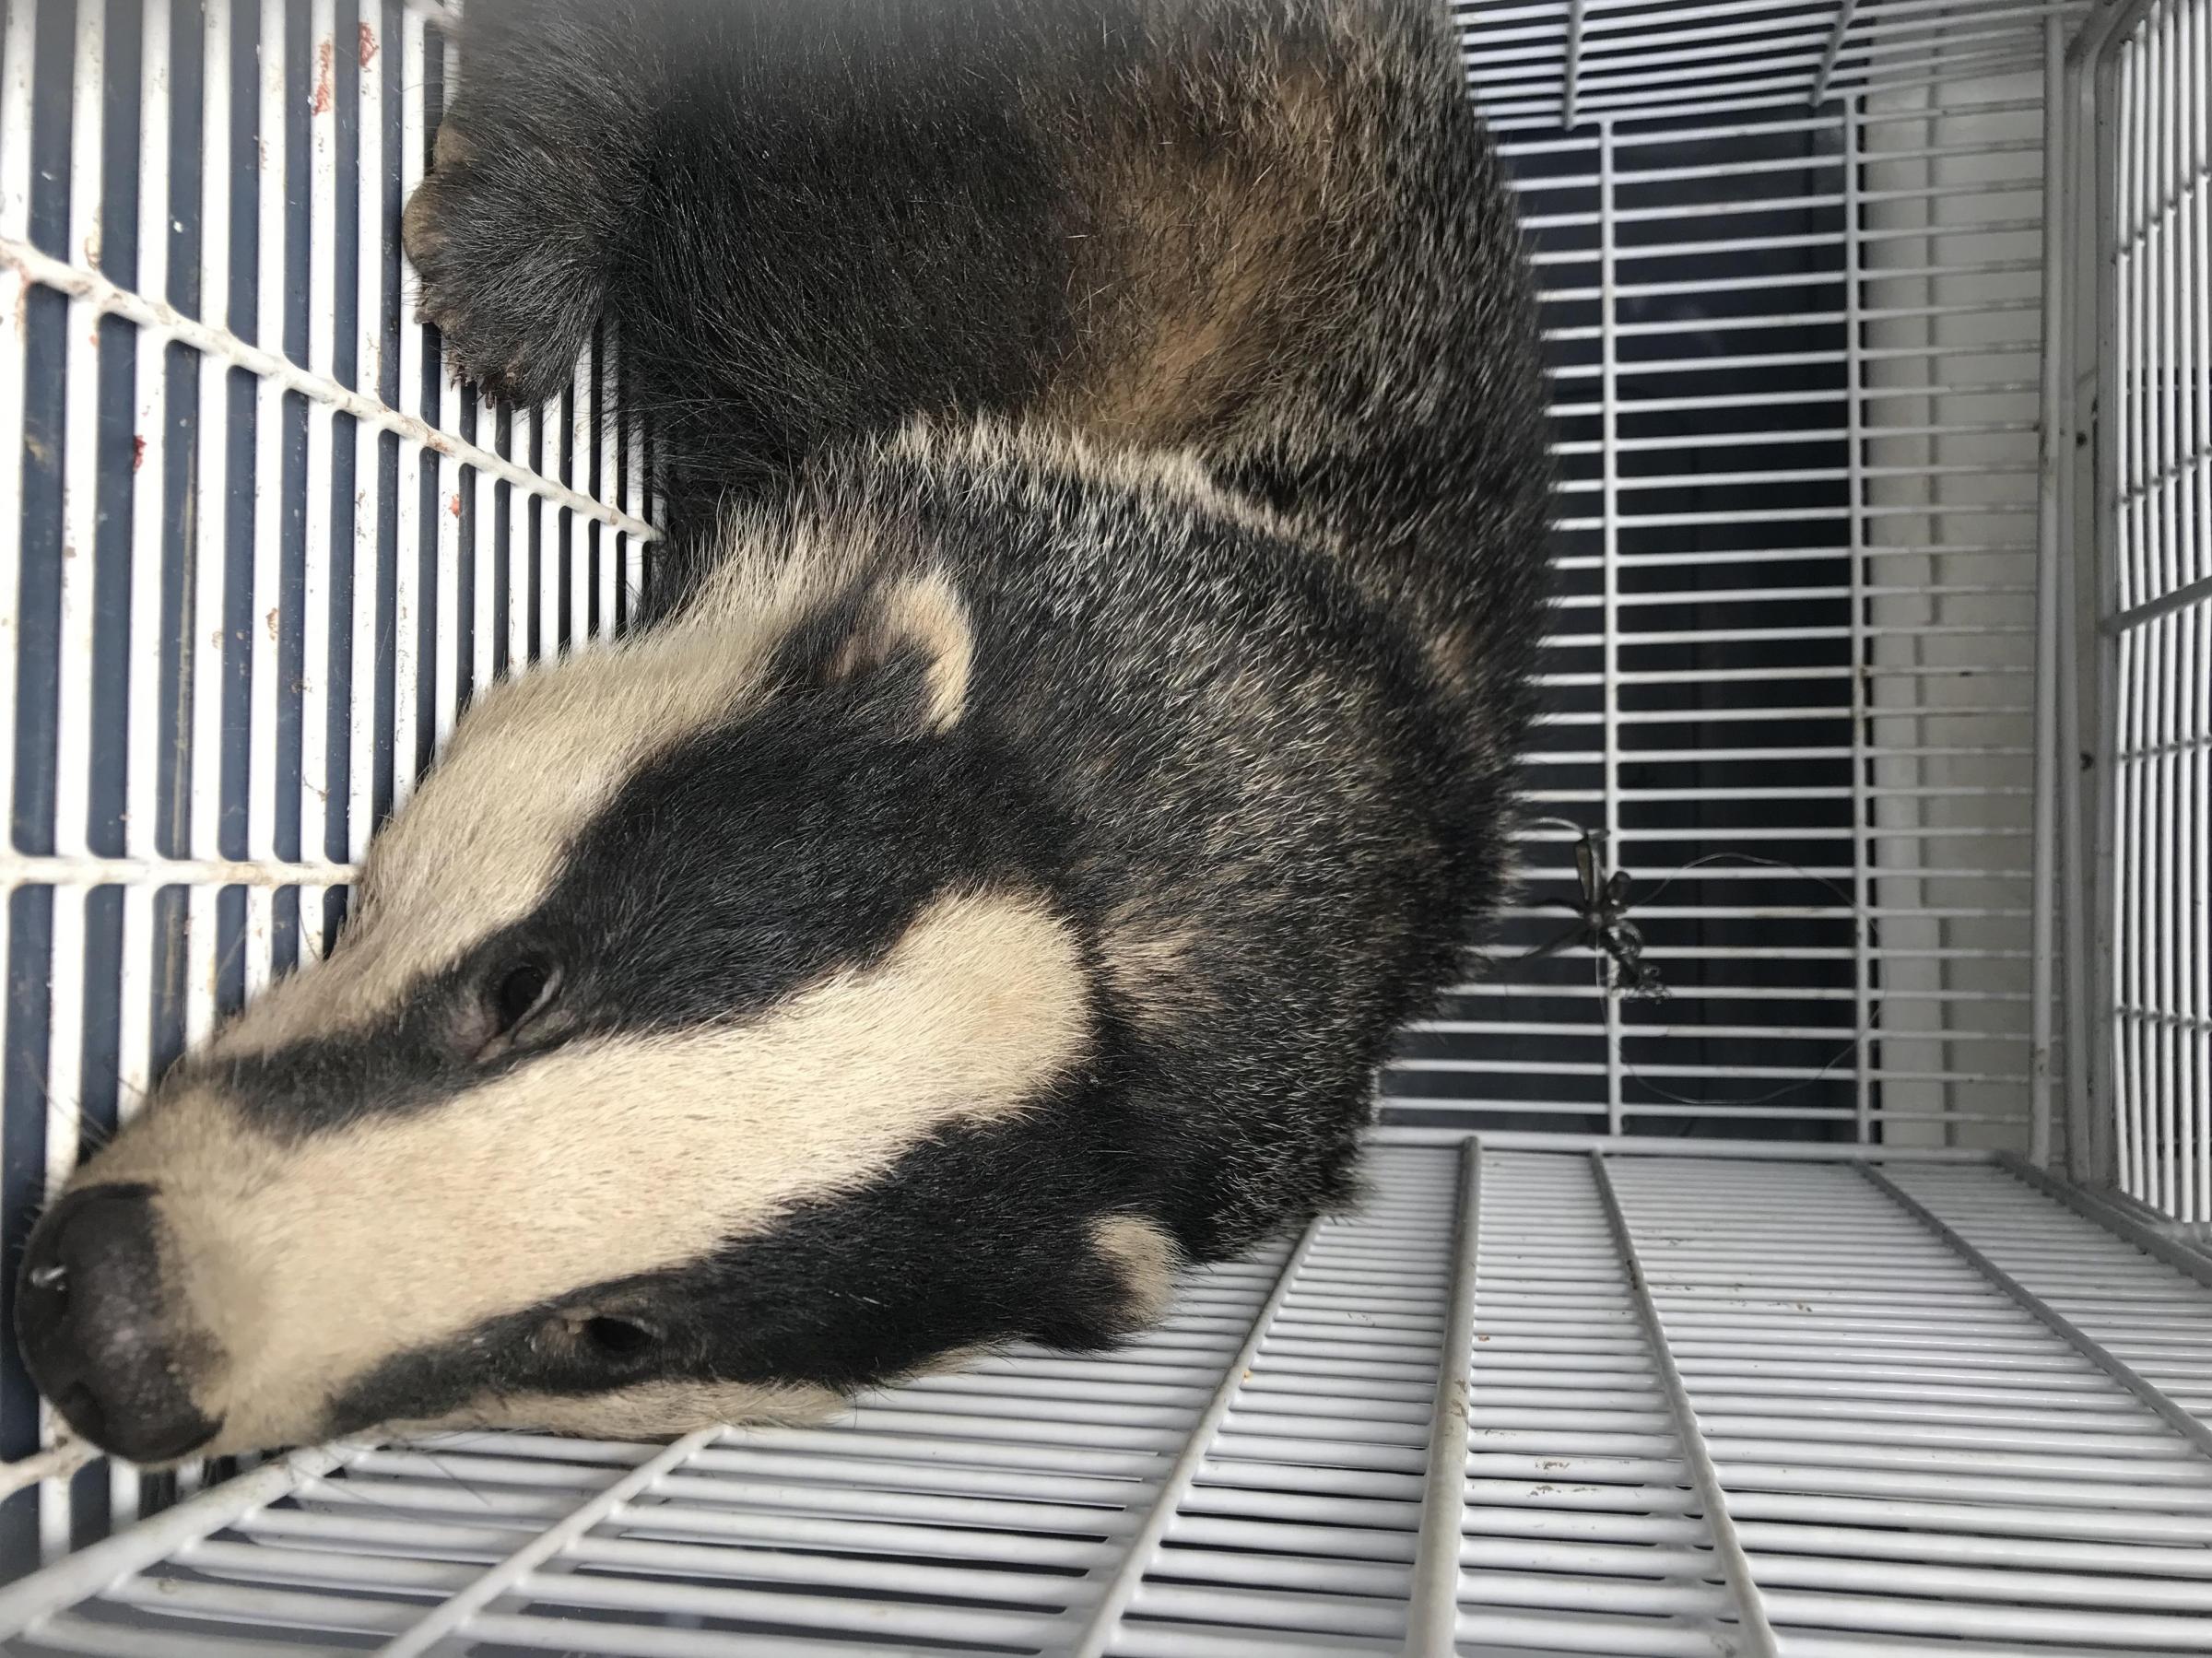 The badger was spotted struggling amid shrubs and hedgerow - before an RSPCA officer found that the wild animal had become trapped by a snare. Picture: RSPCA